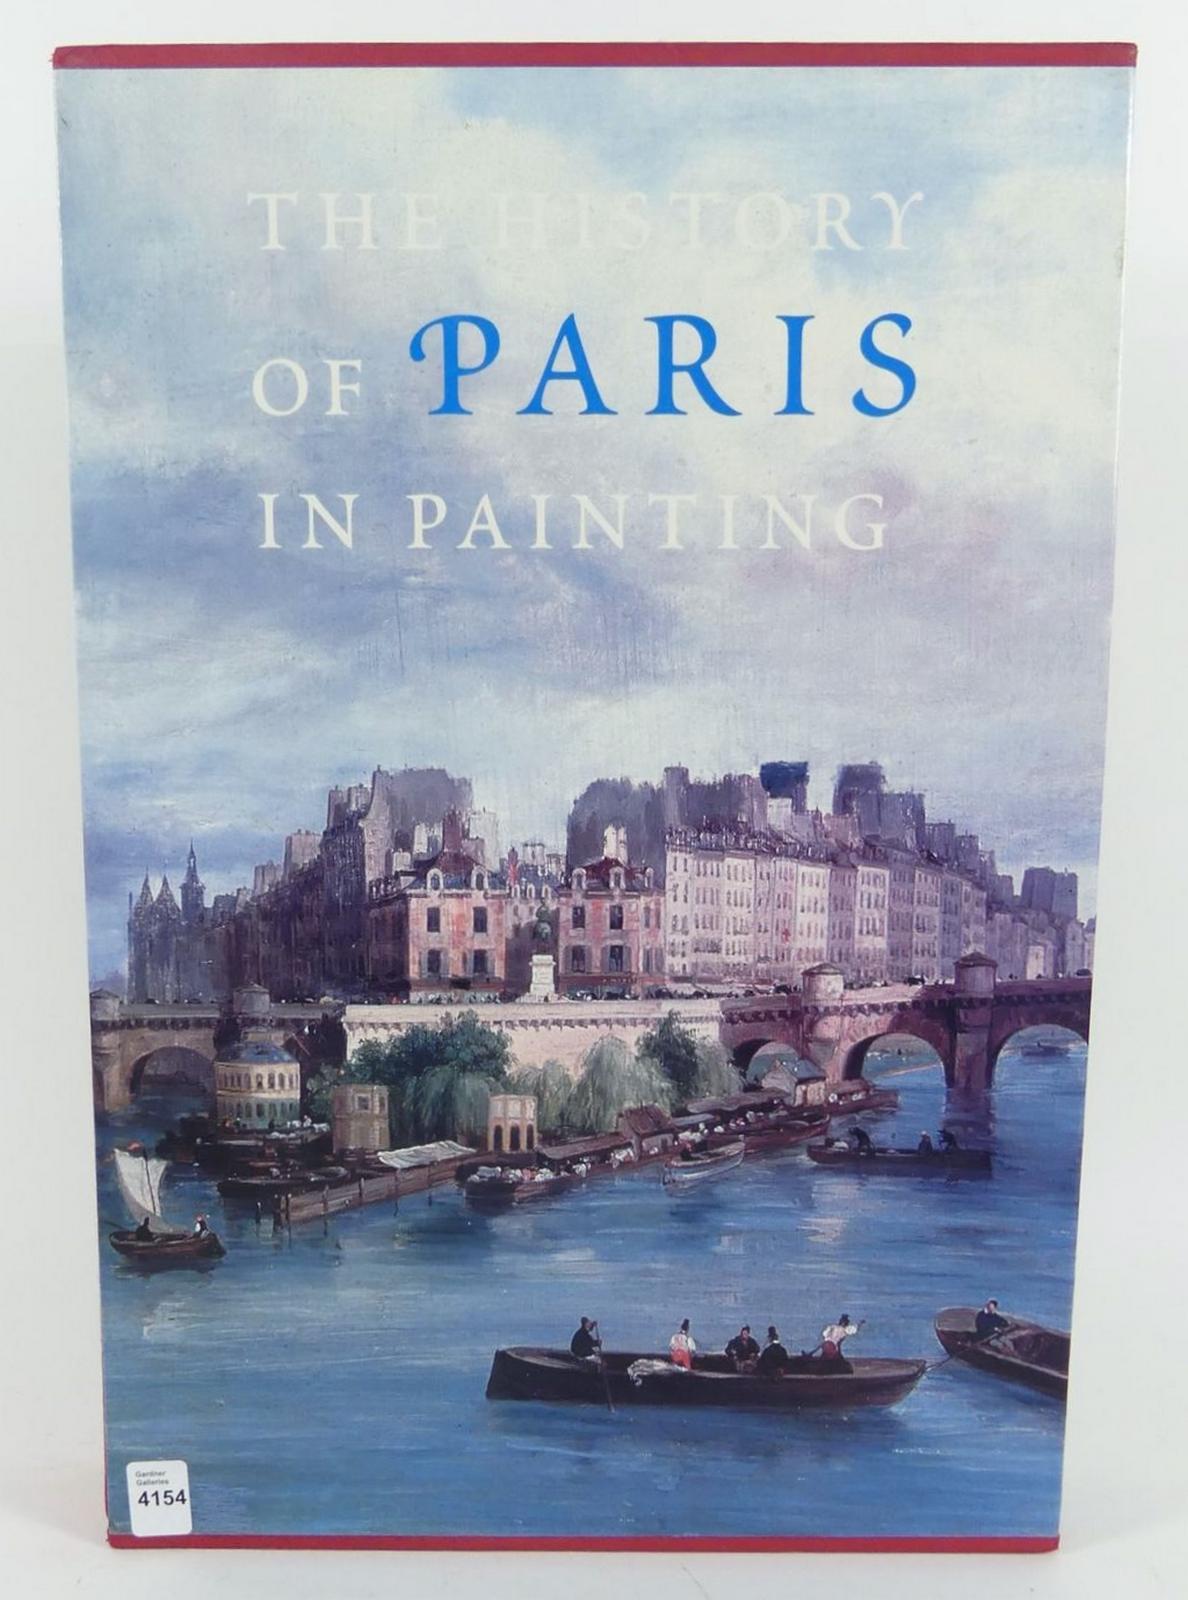 THE HISTORY OF PARIS IN PAINTINGS